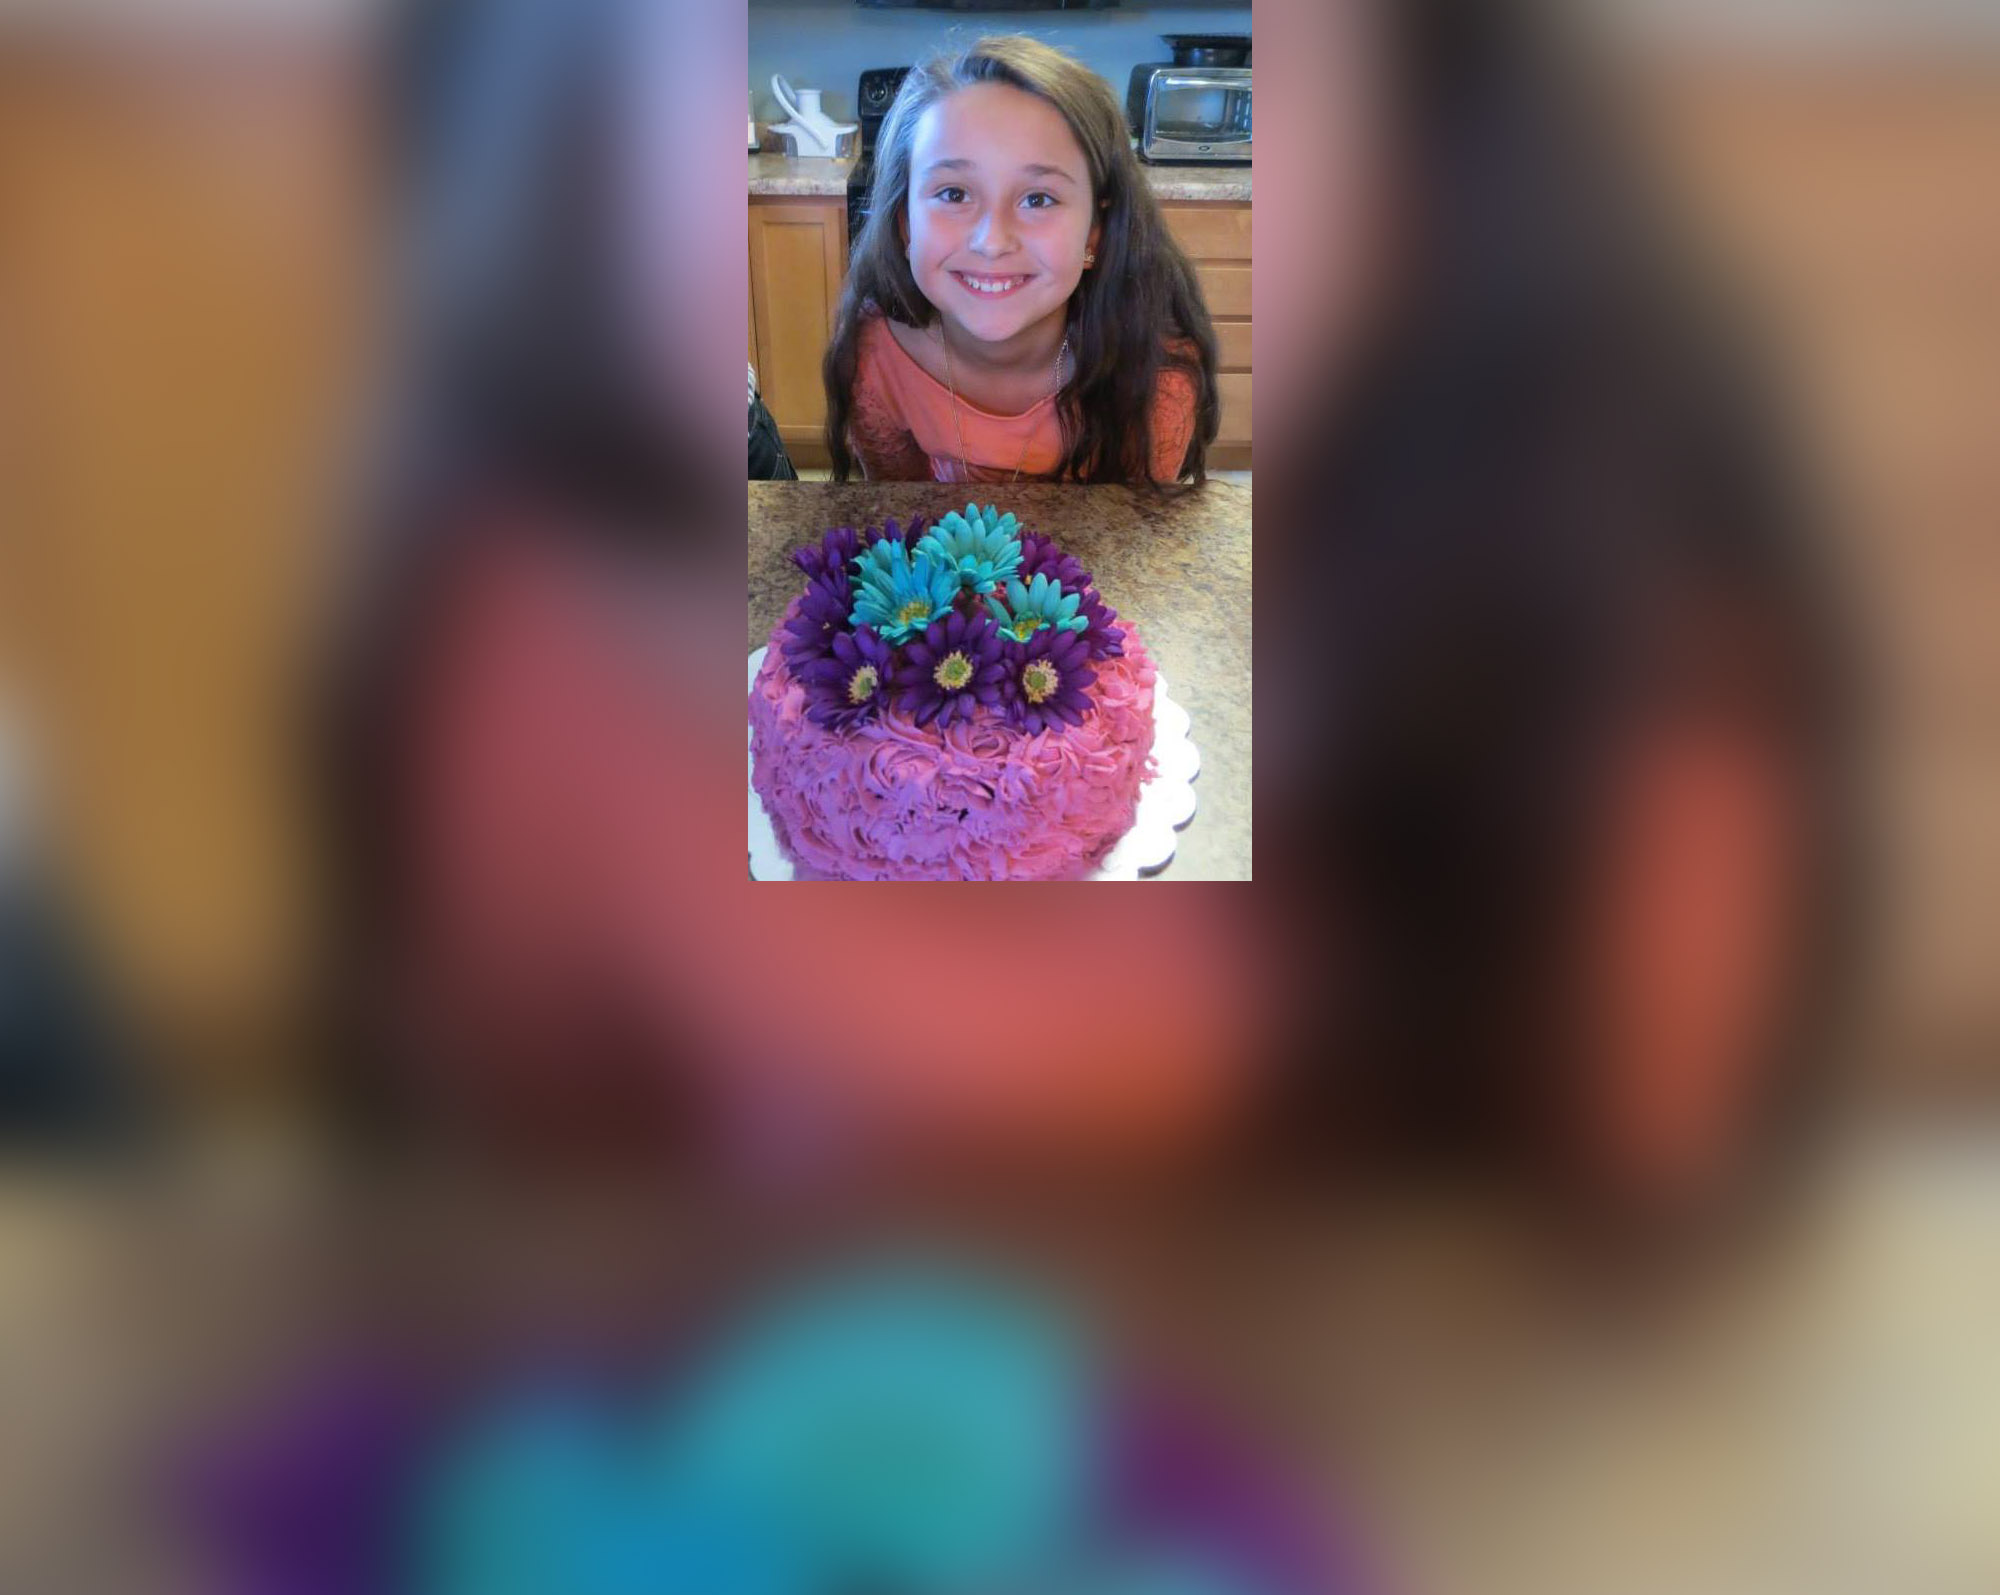 PHOTO: Chloe Stirling smiles for a photo with a cake she made.